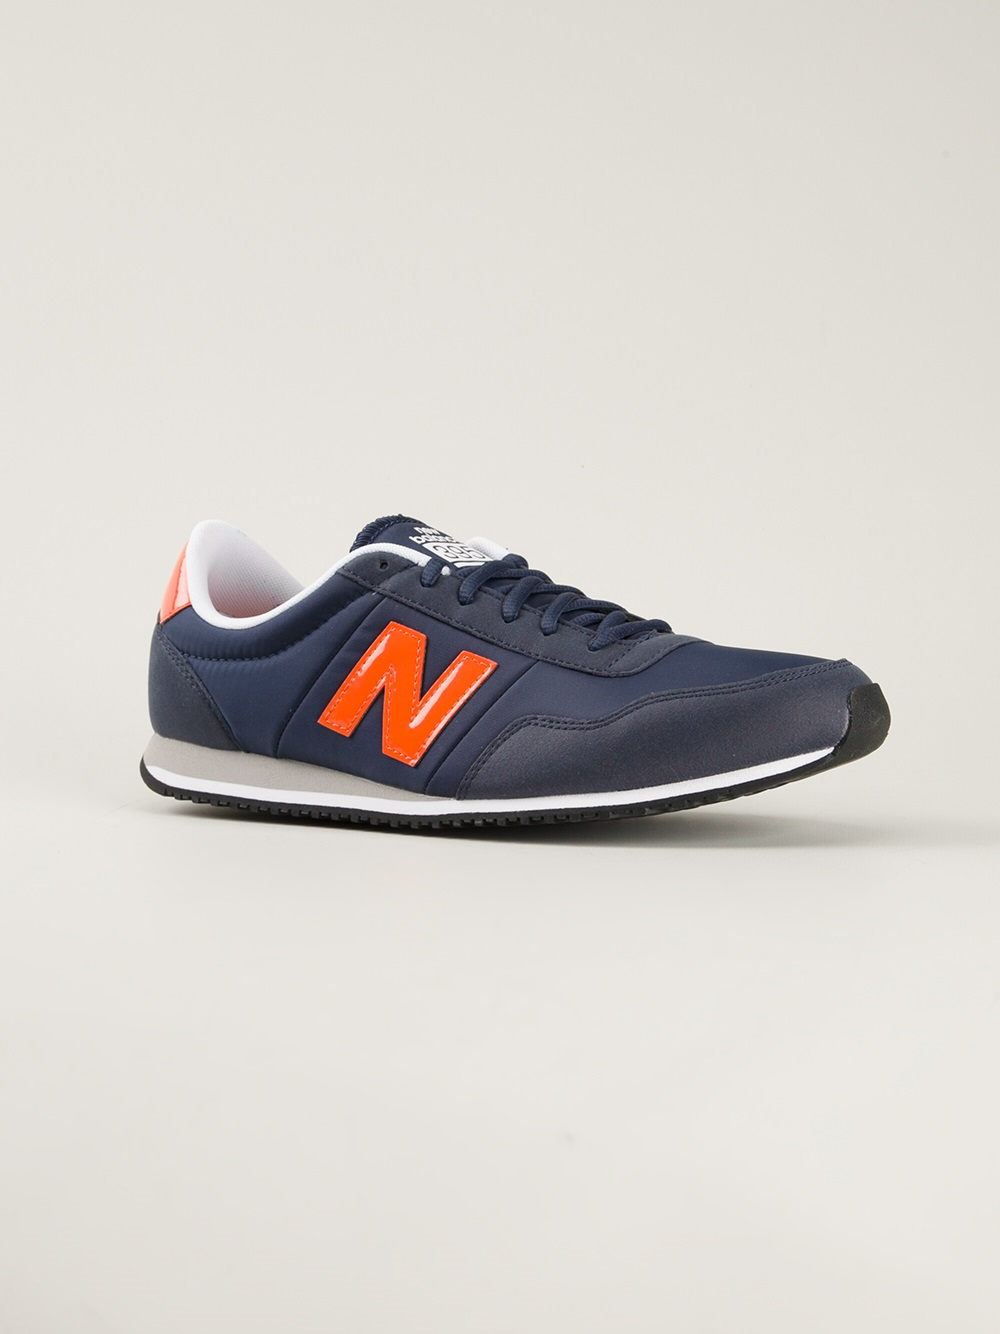 New Balance U 395 Trainers in Blue for Men - Lyst